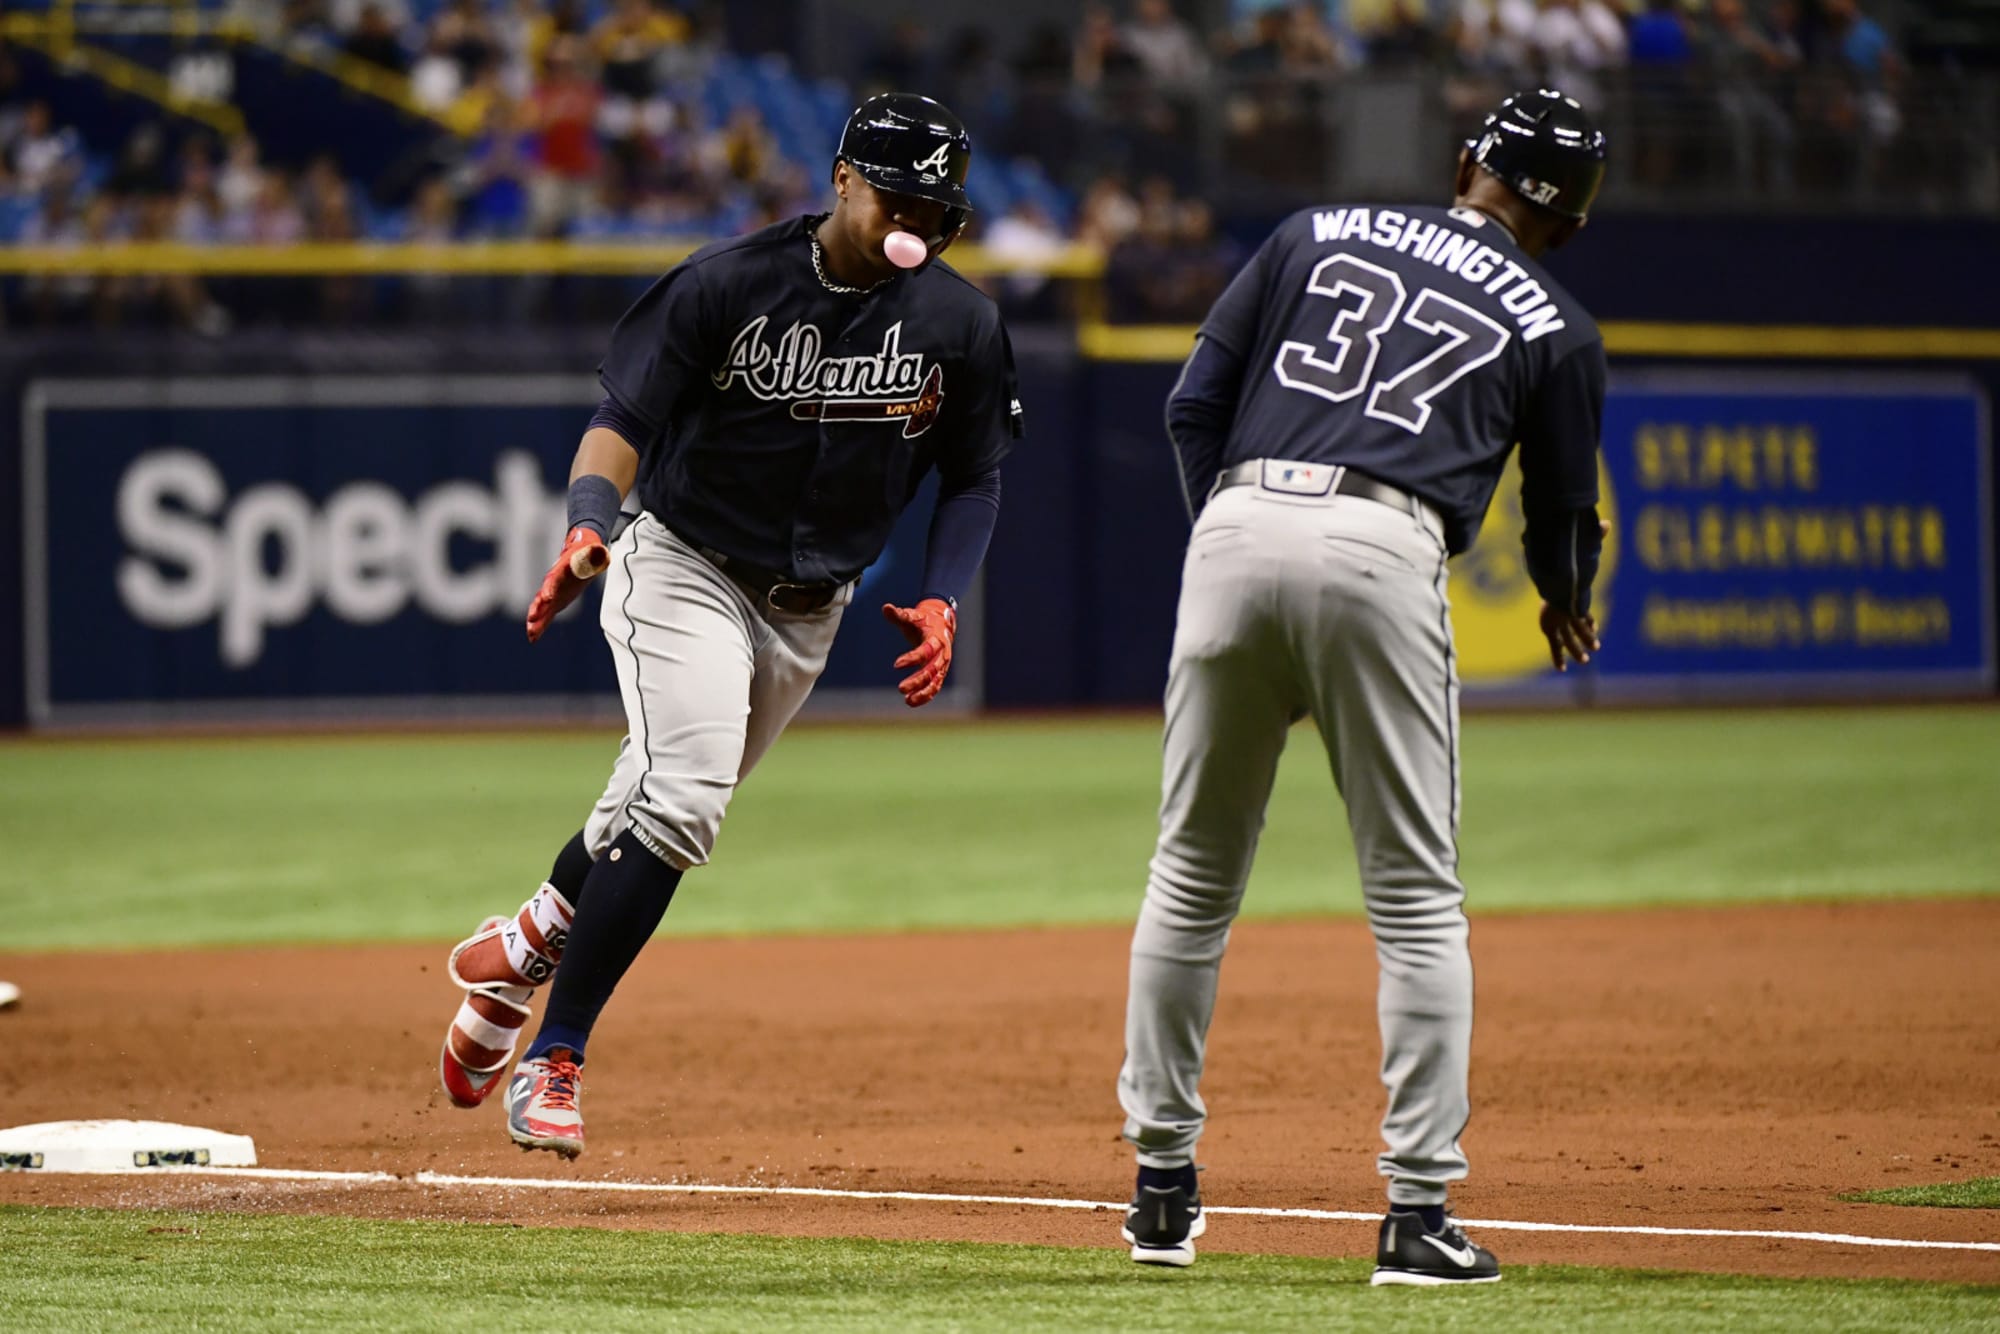 Atlants Braves Shutout the Rays Backed by Acuña Jr. Homer